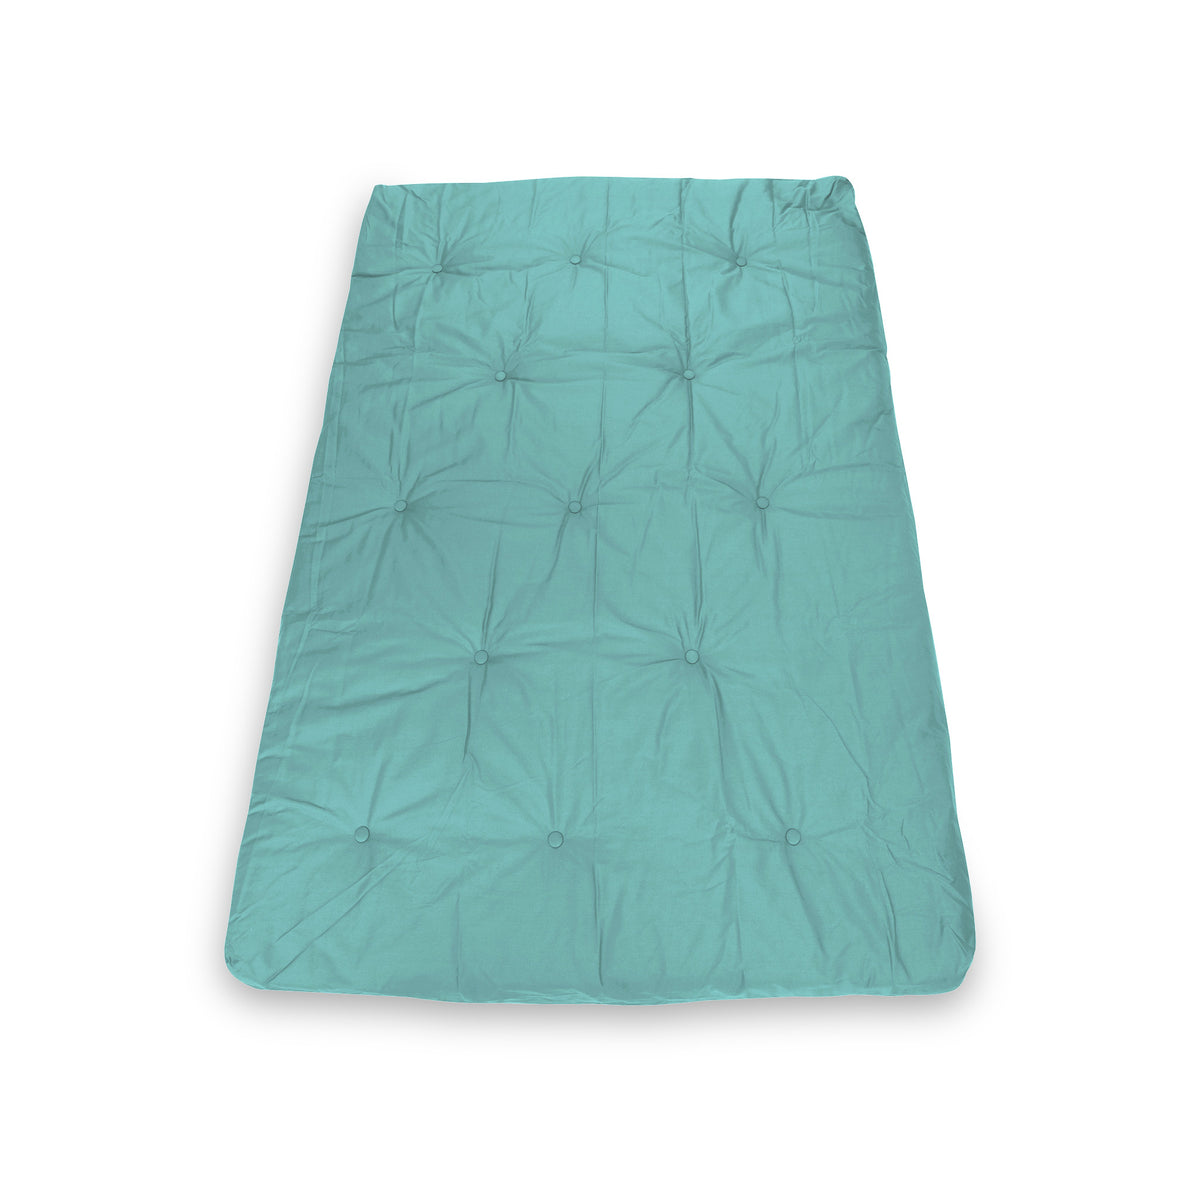 Maggie Double Futon Mattress Teal from Roseland Furniture